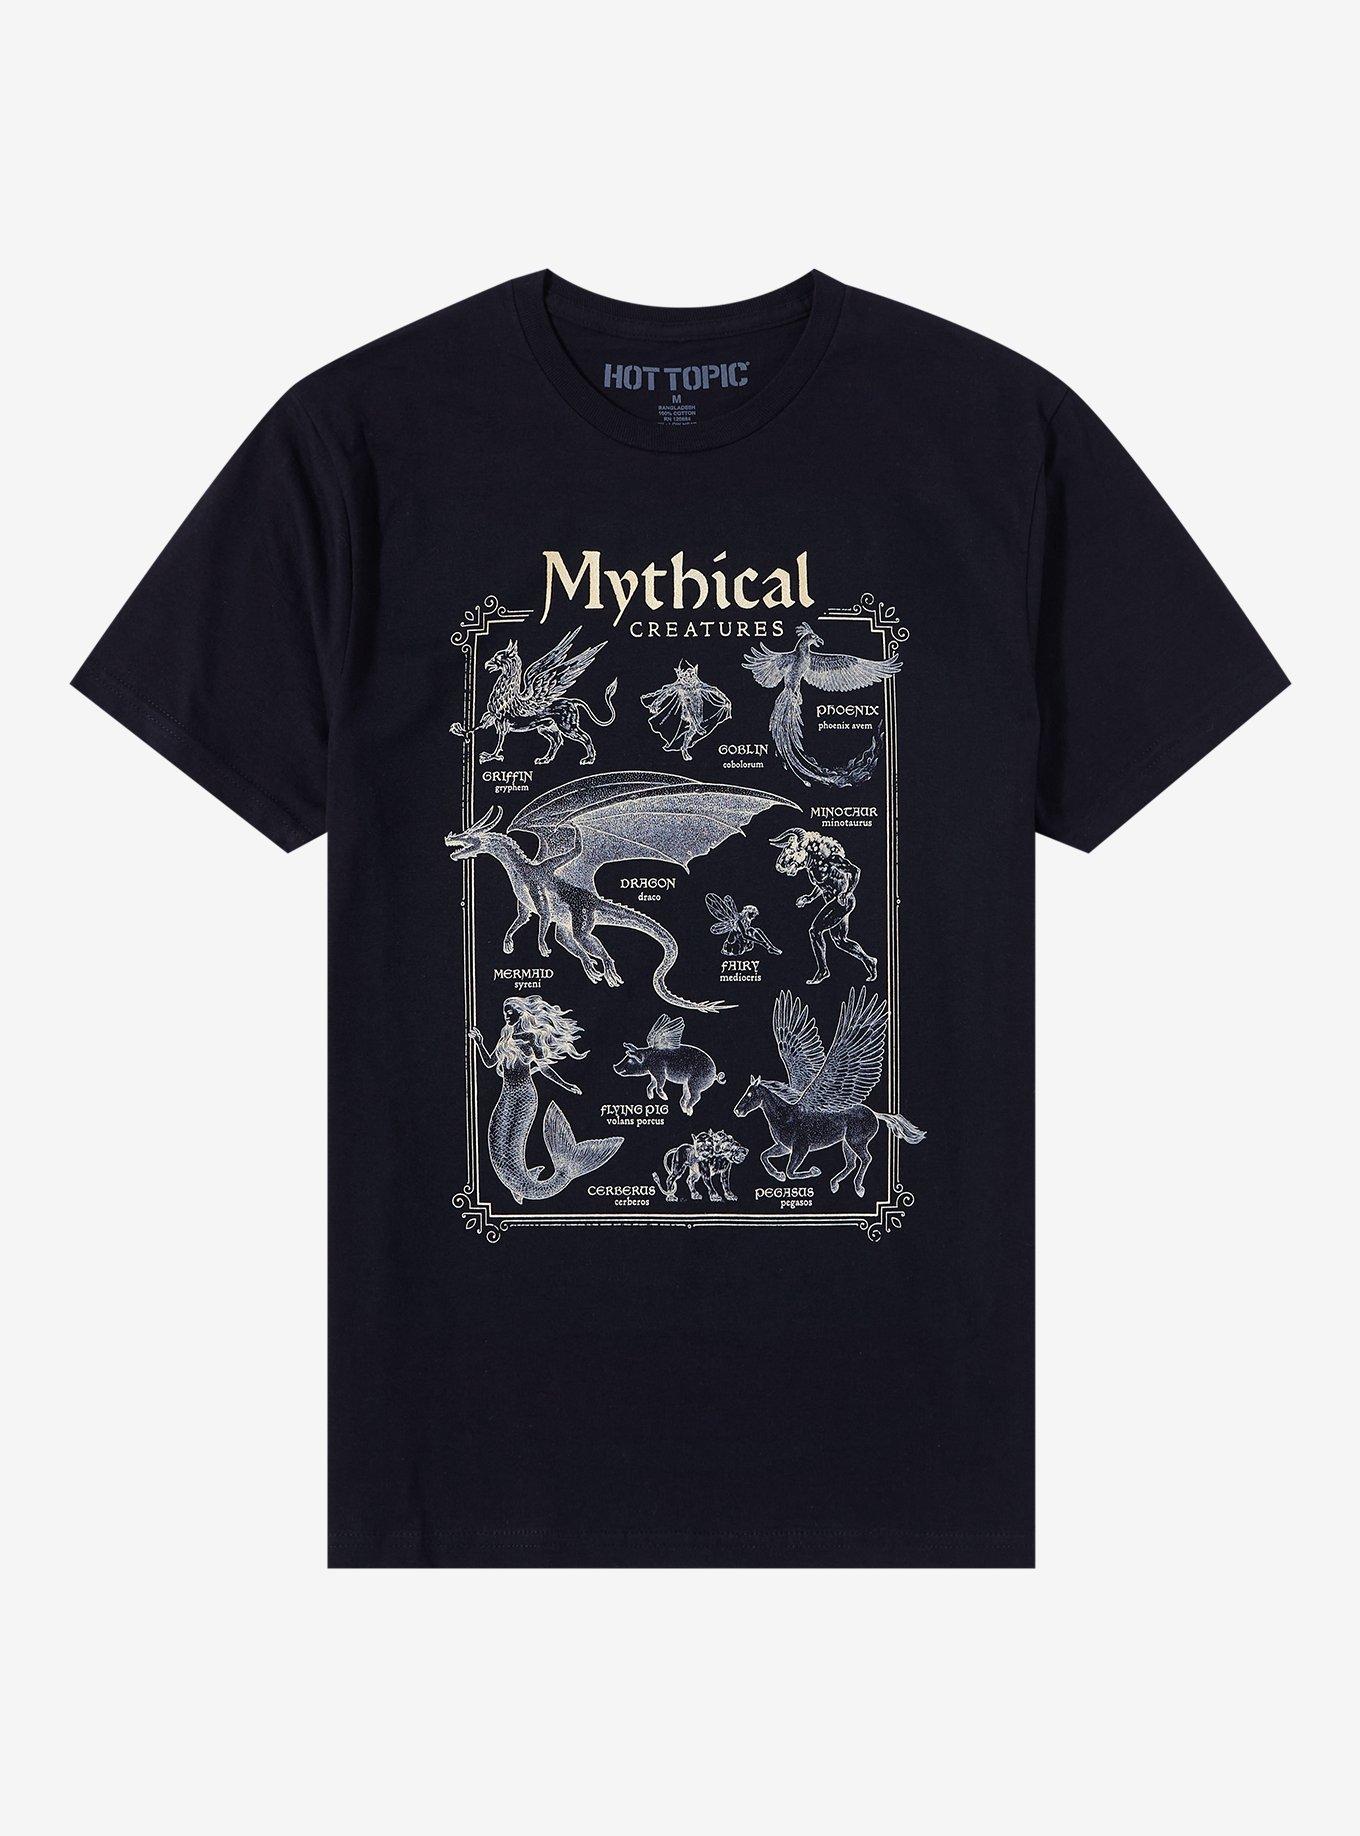 Mythical Creature Infographic T-Shirt, BLACK, hi-res